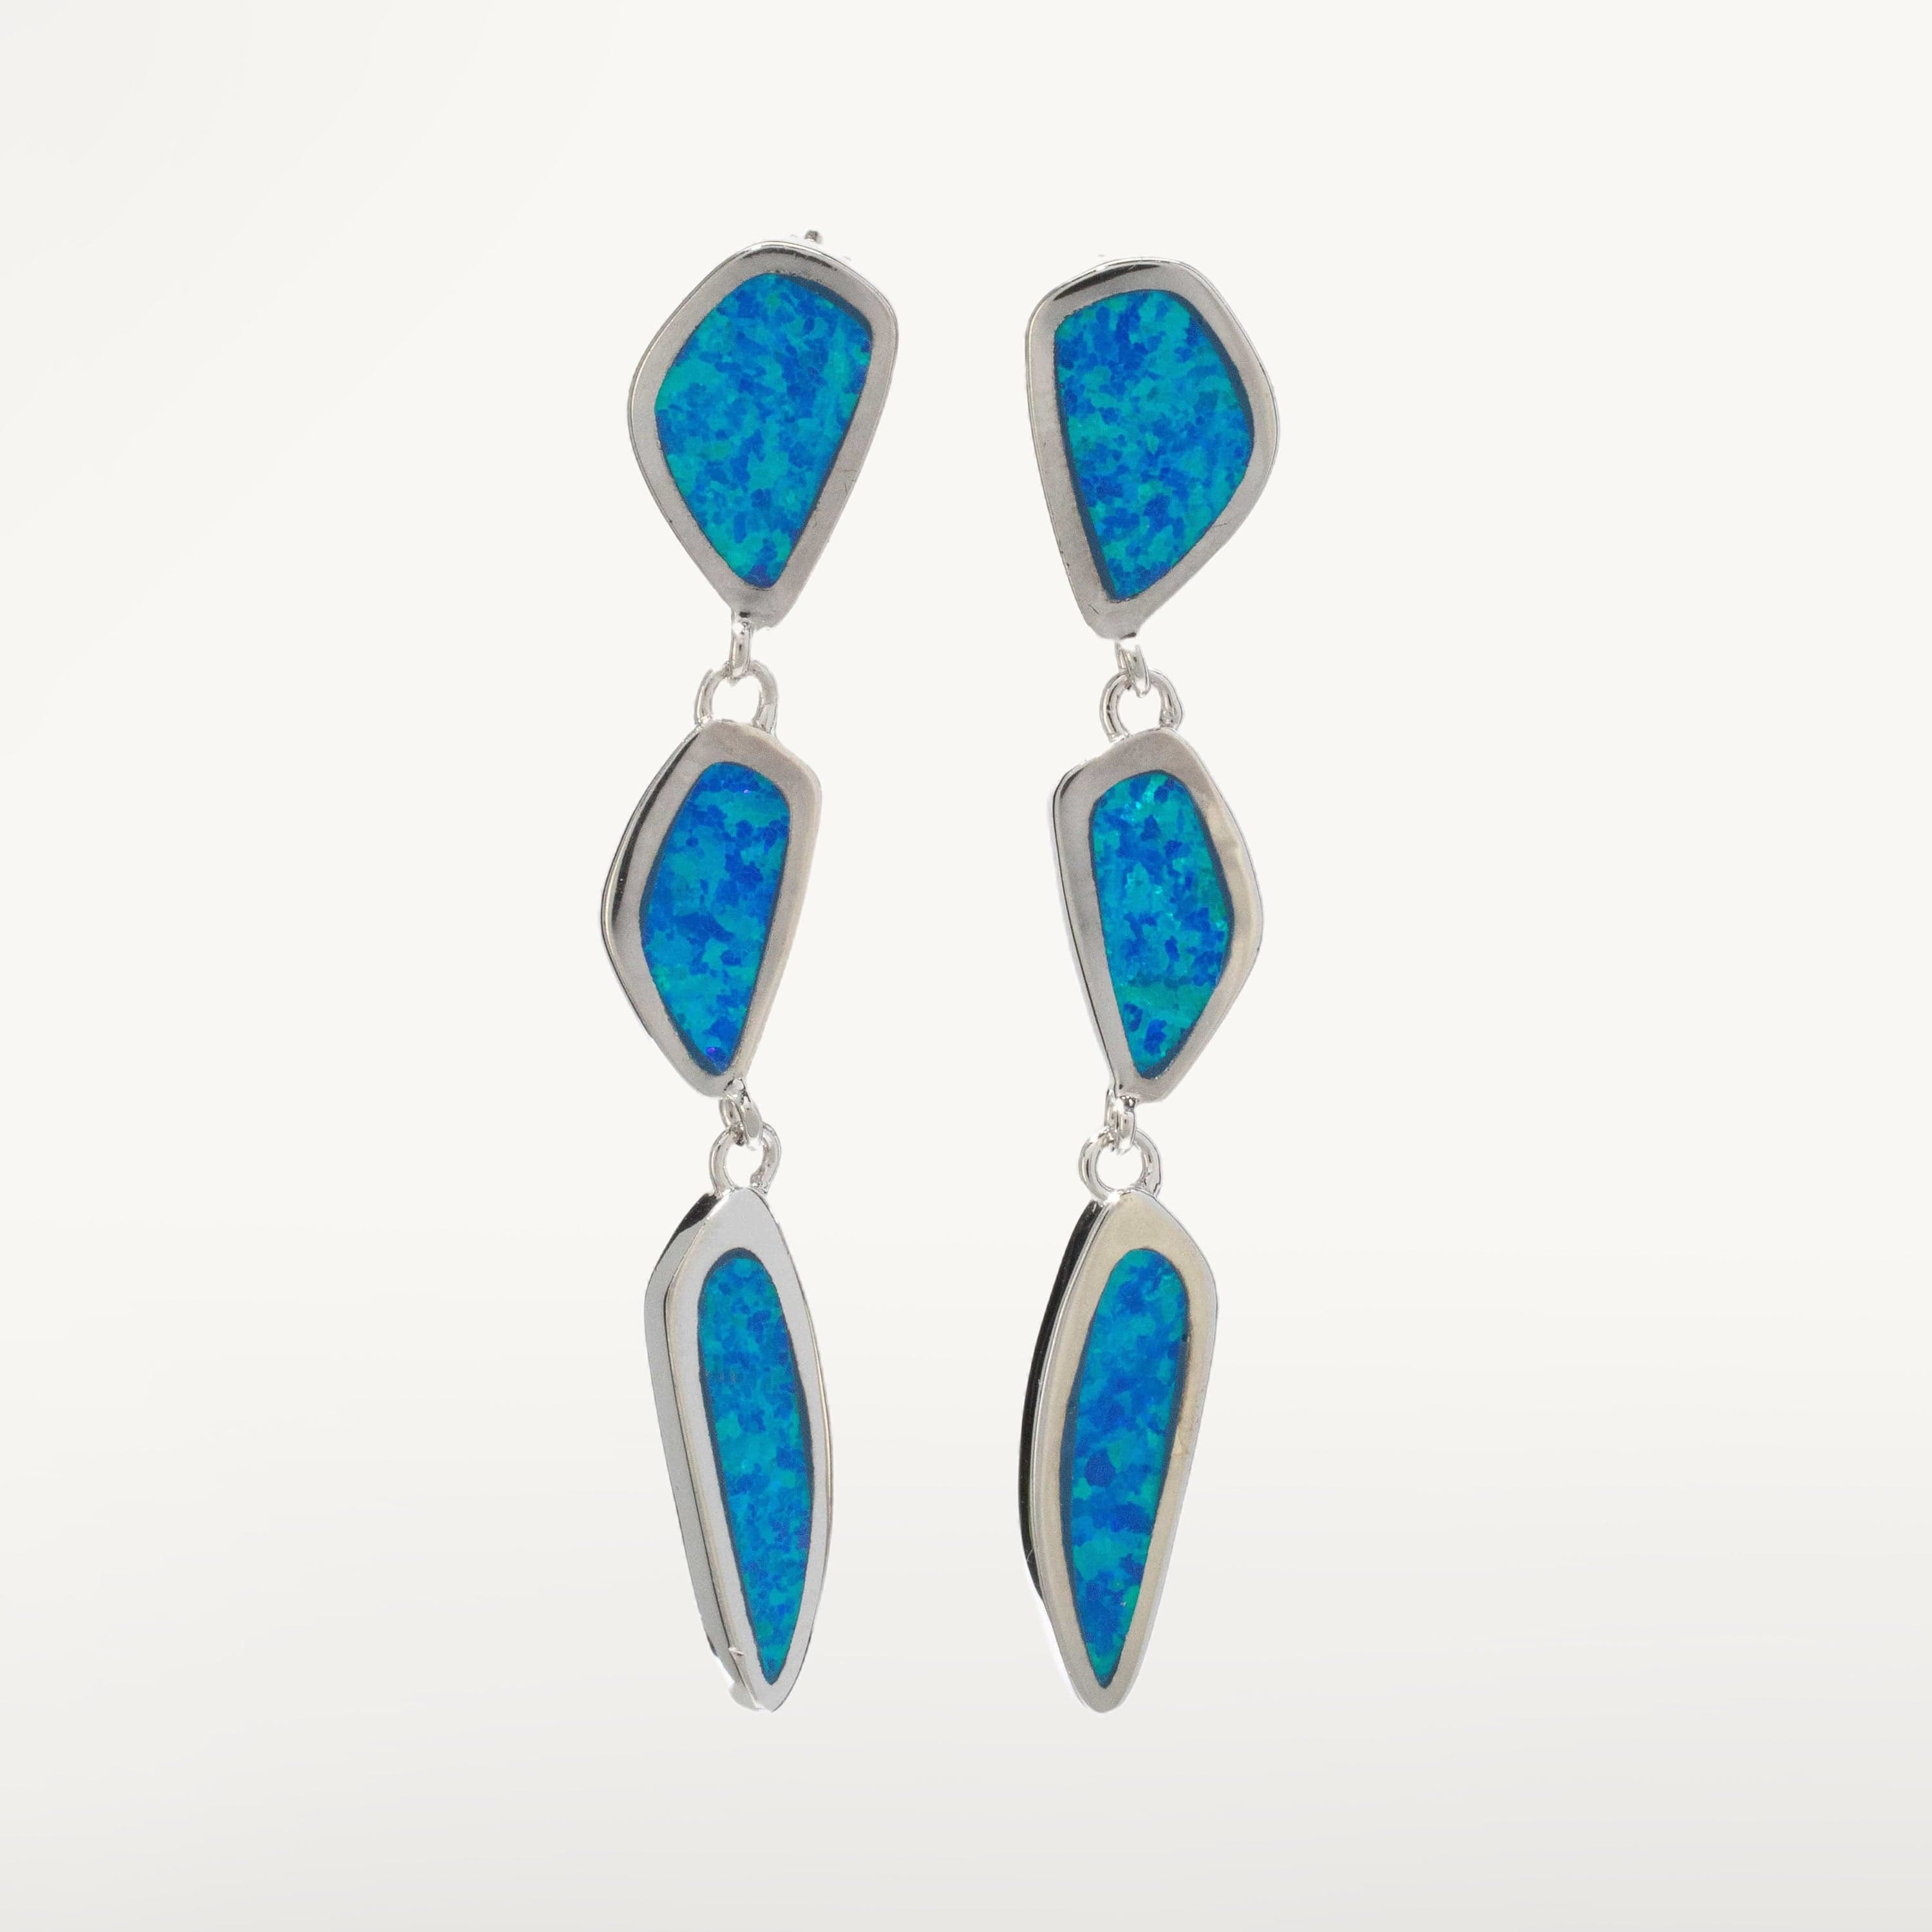 Kalifano Sterling Silver Opalite Aqua Opal 925 Sterling Silver Dangly Earrings with Stud Backing OPLE-22200-AO